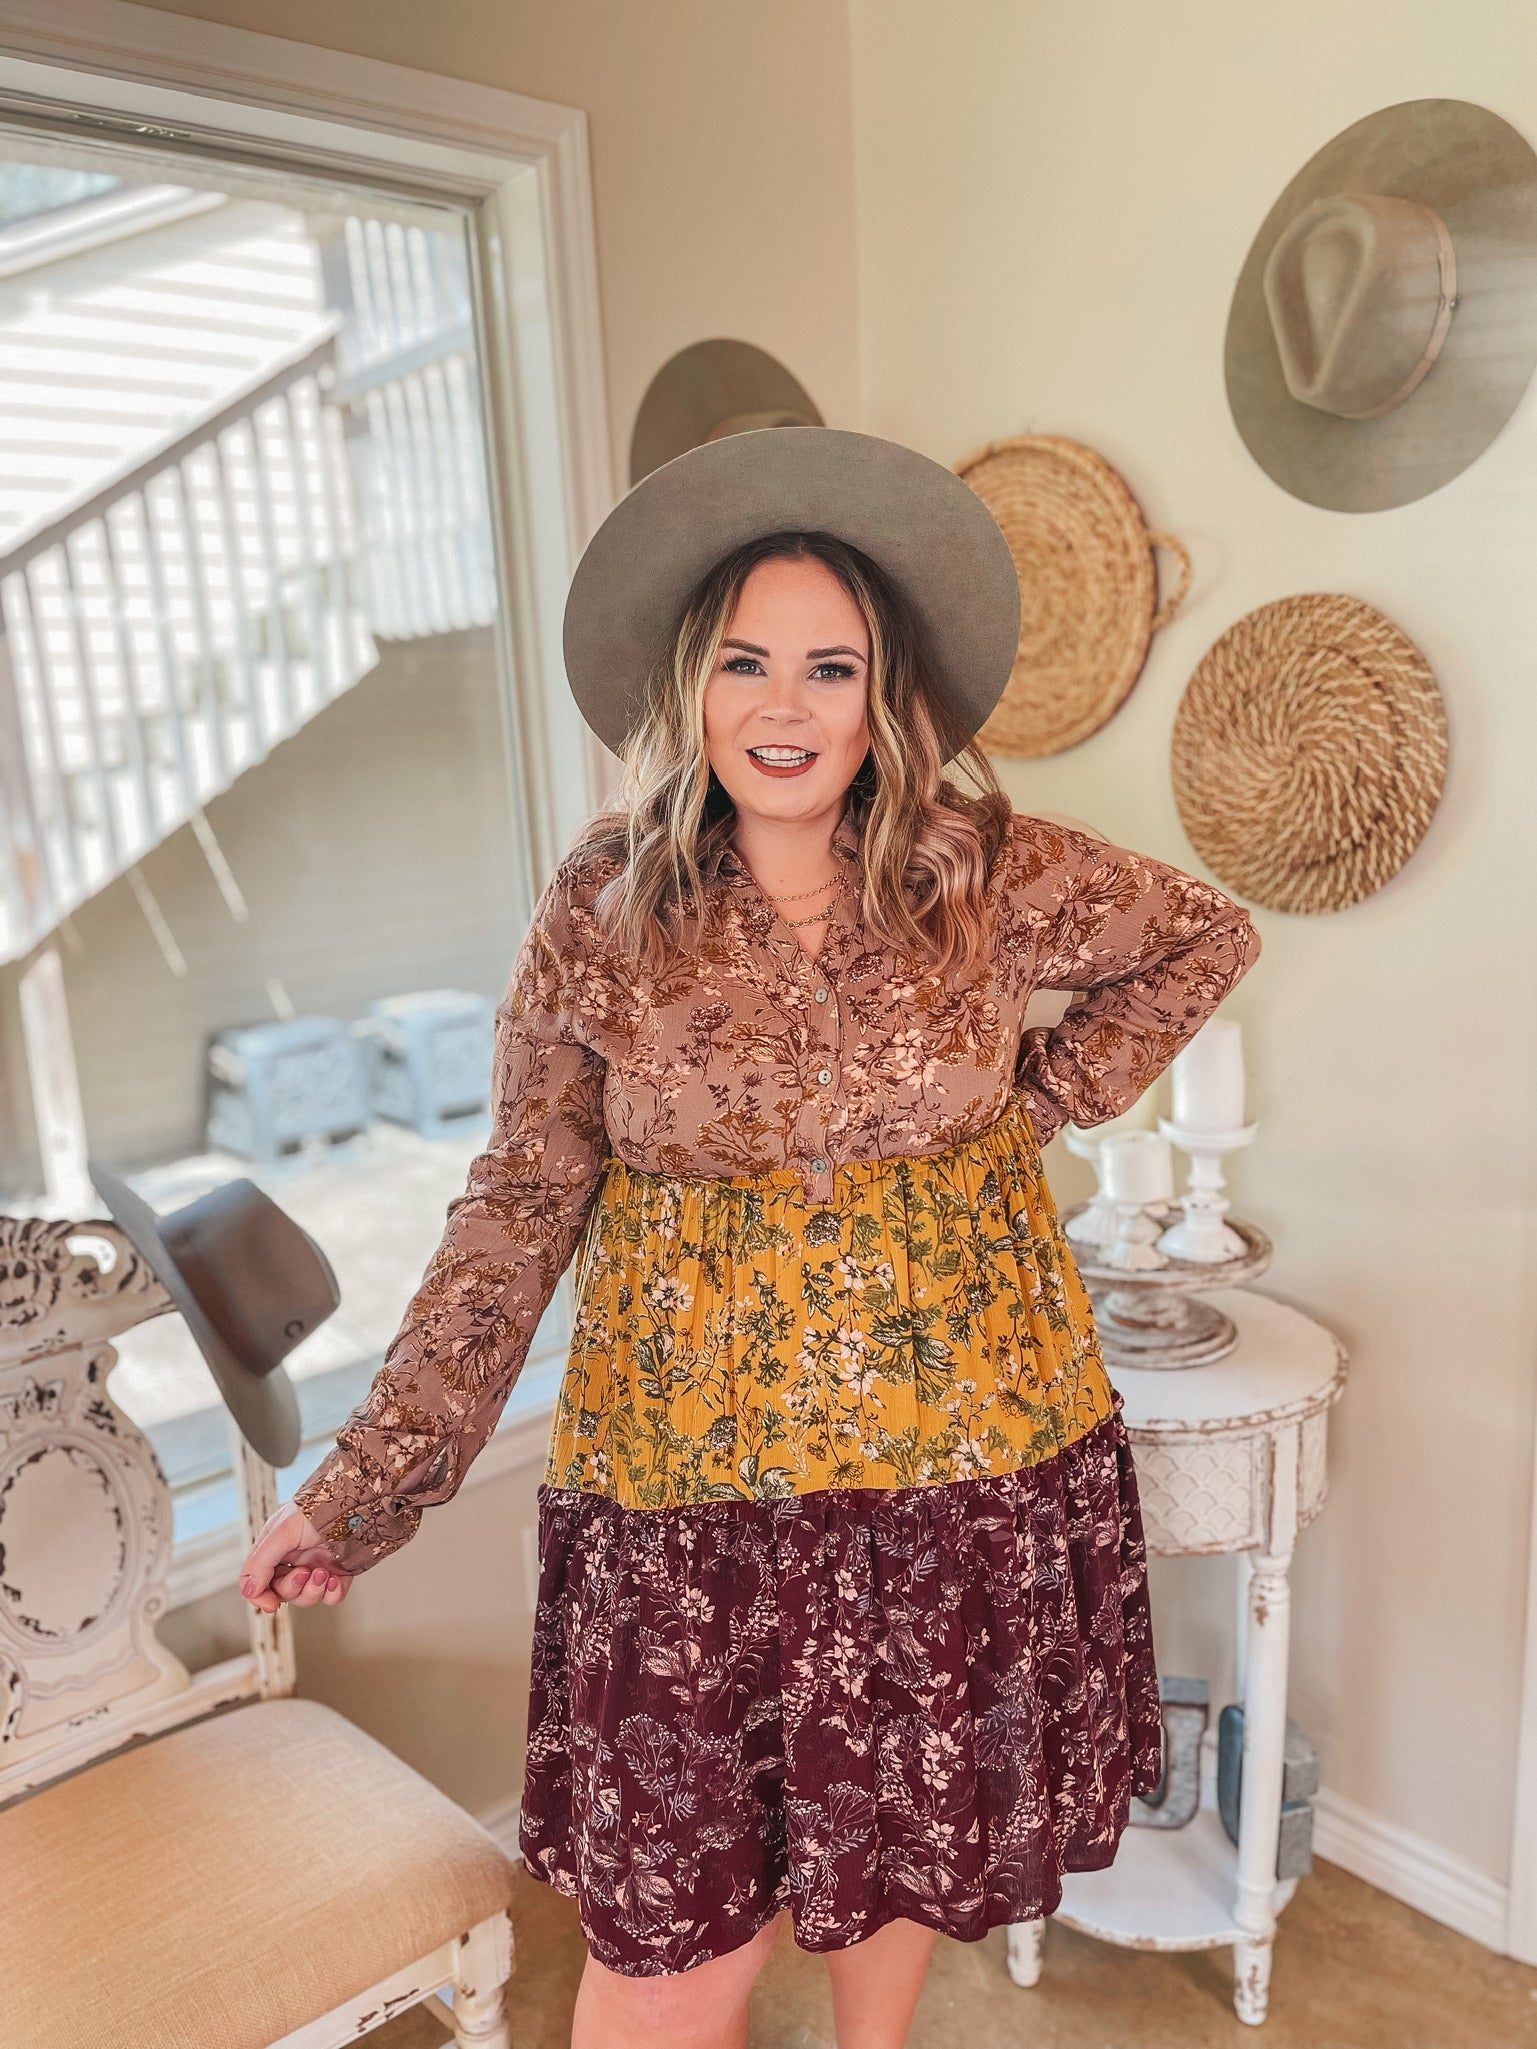 Among the Flowers Floral Ruffle Tier Long Sleeve Dress in Taupe, Mustard, and Burgundy - Giddy Up Glamour Boutique